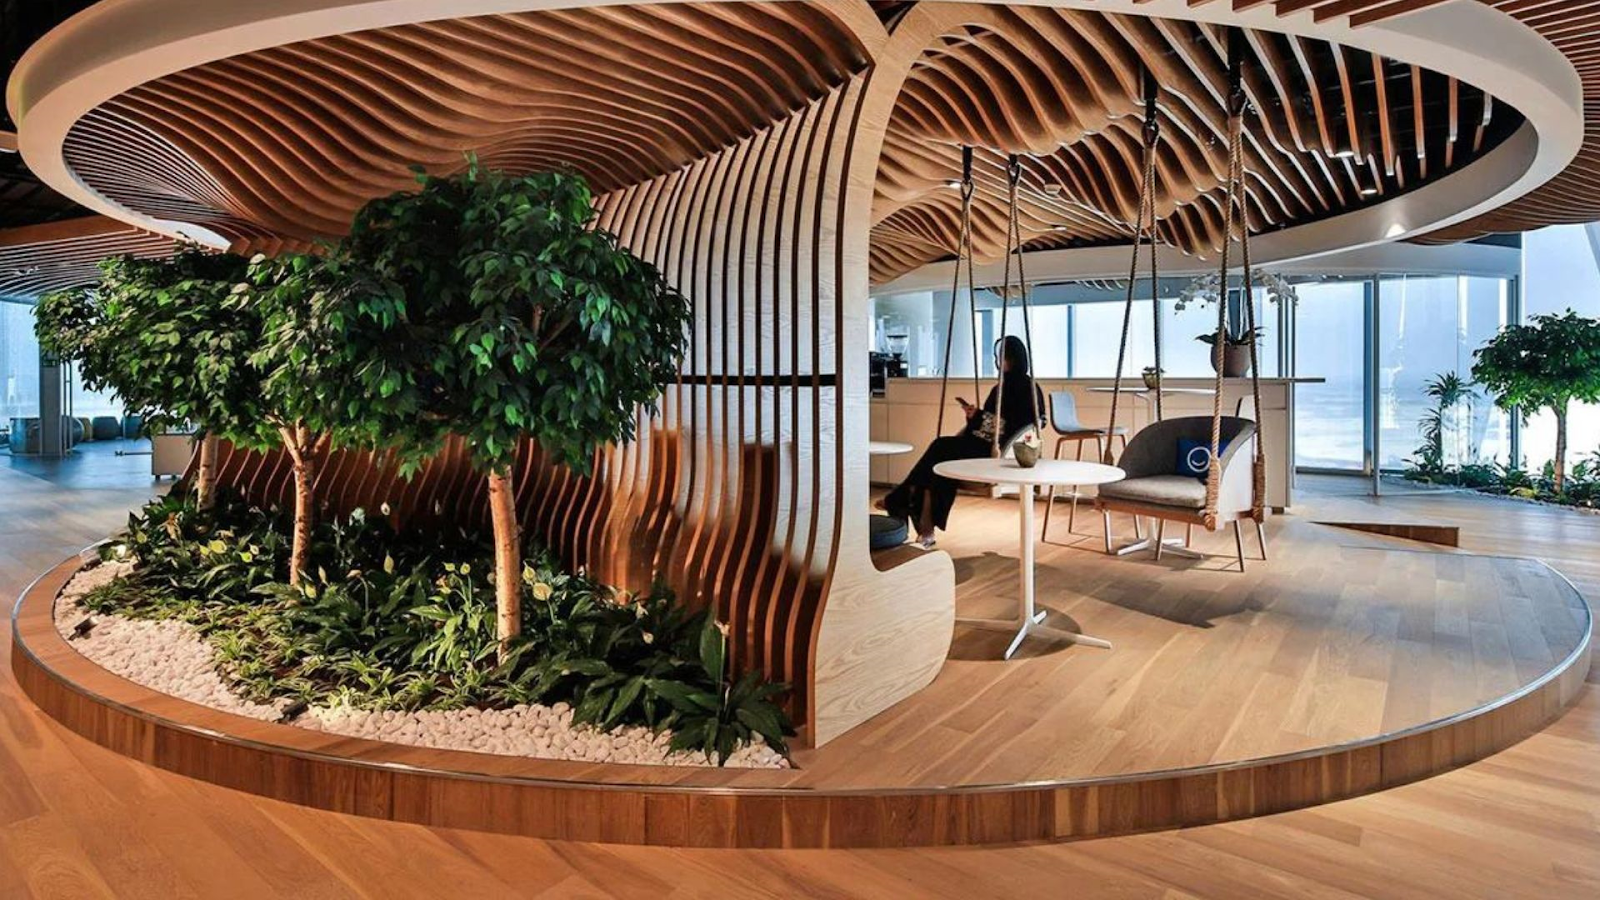 Wellness Home designs that are biophilic.